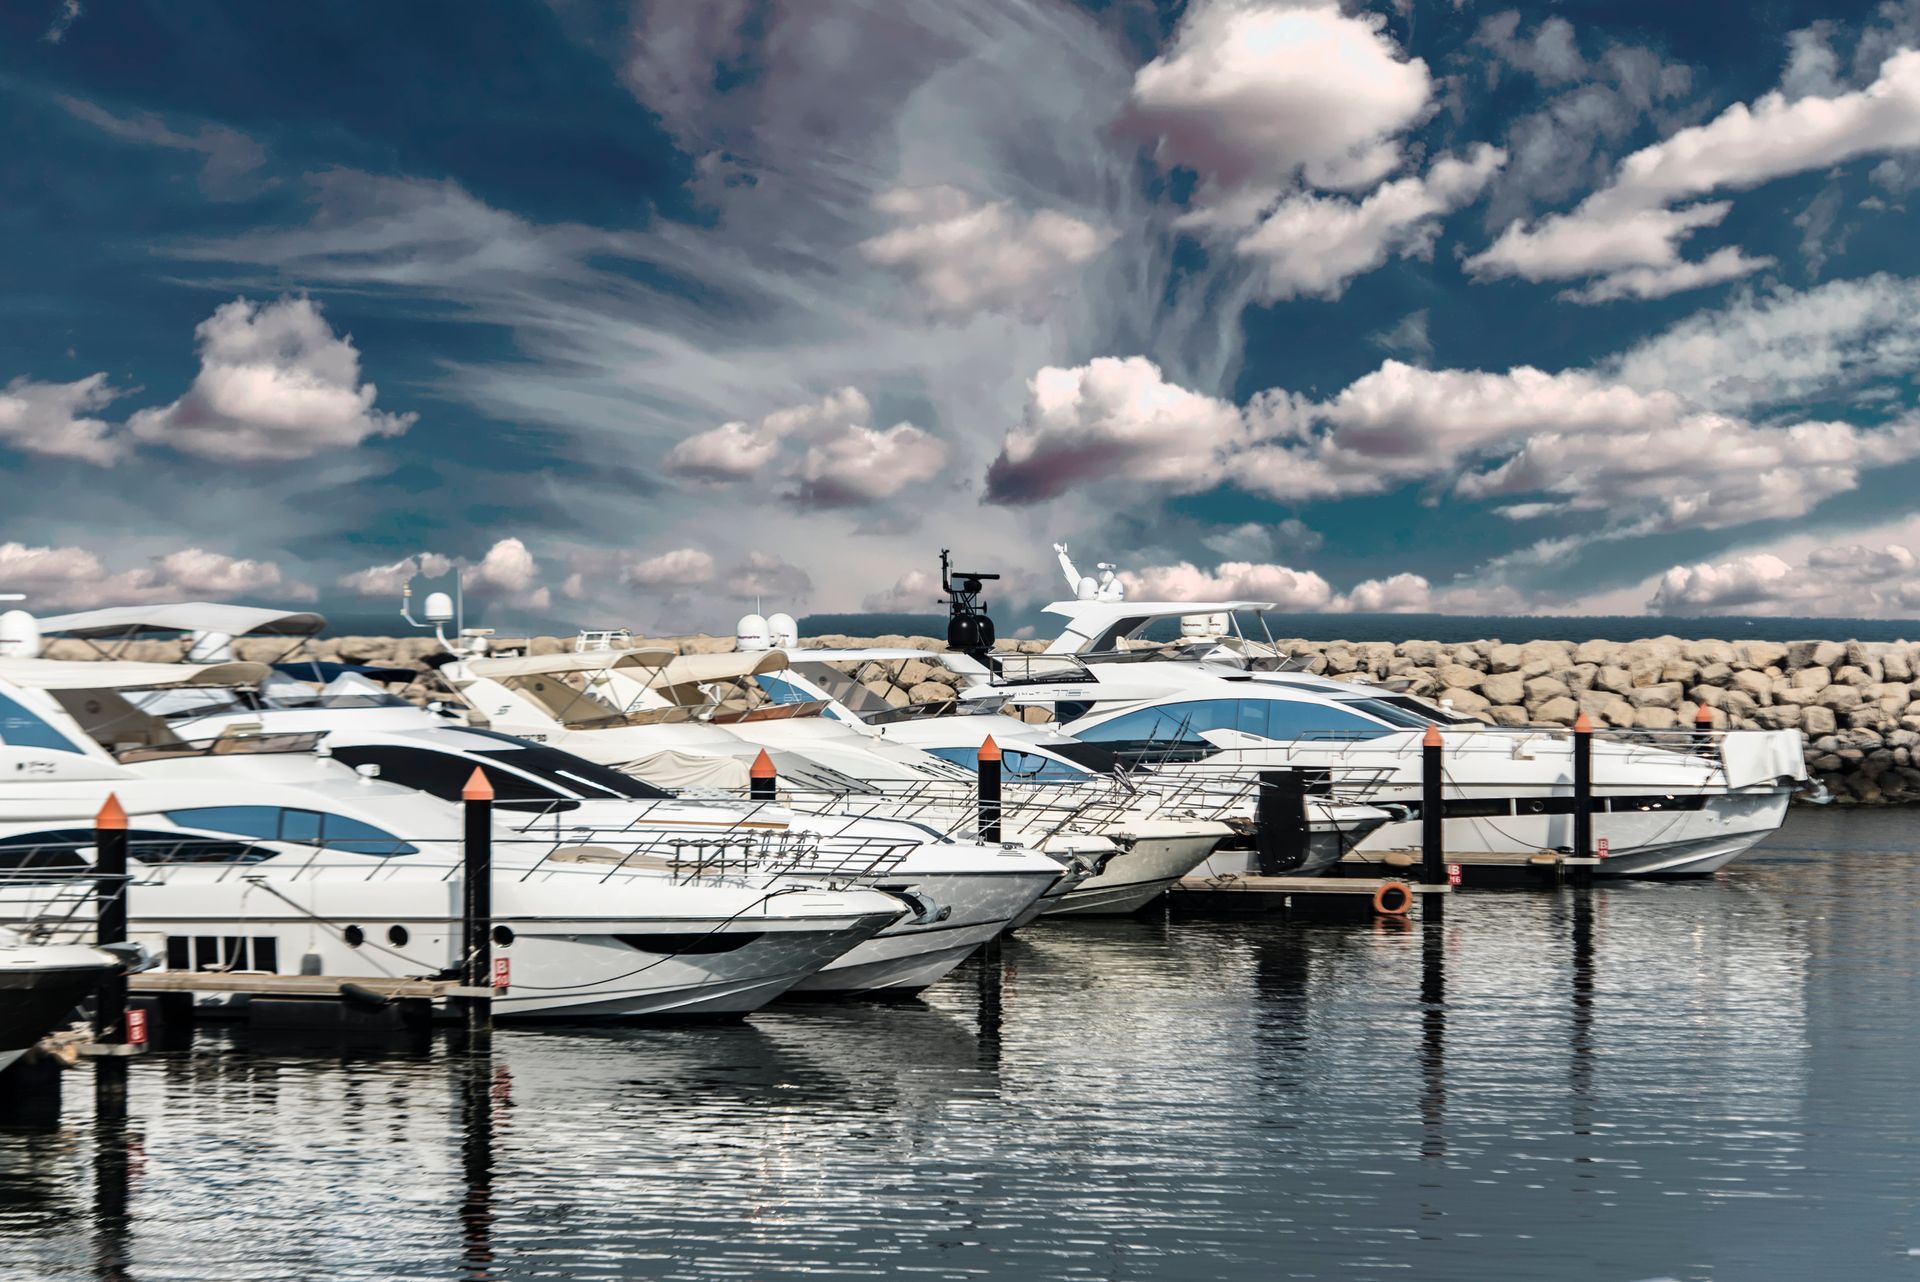 yachts parked at a marina image by frans van heerden